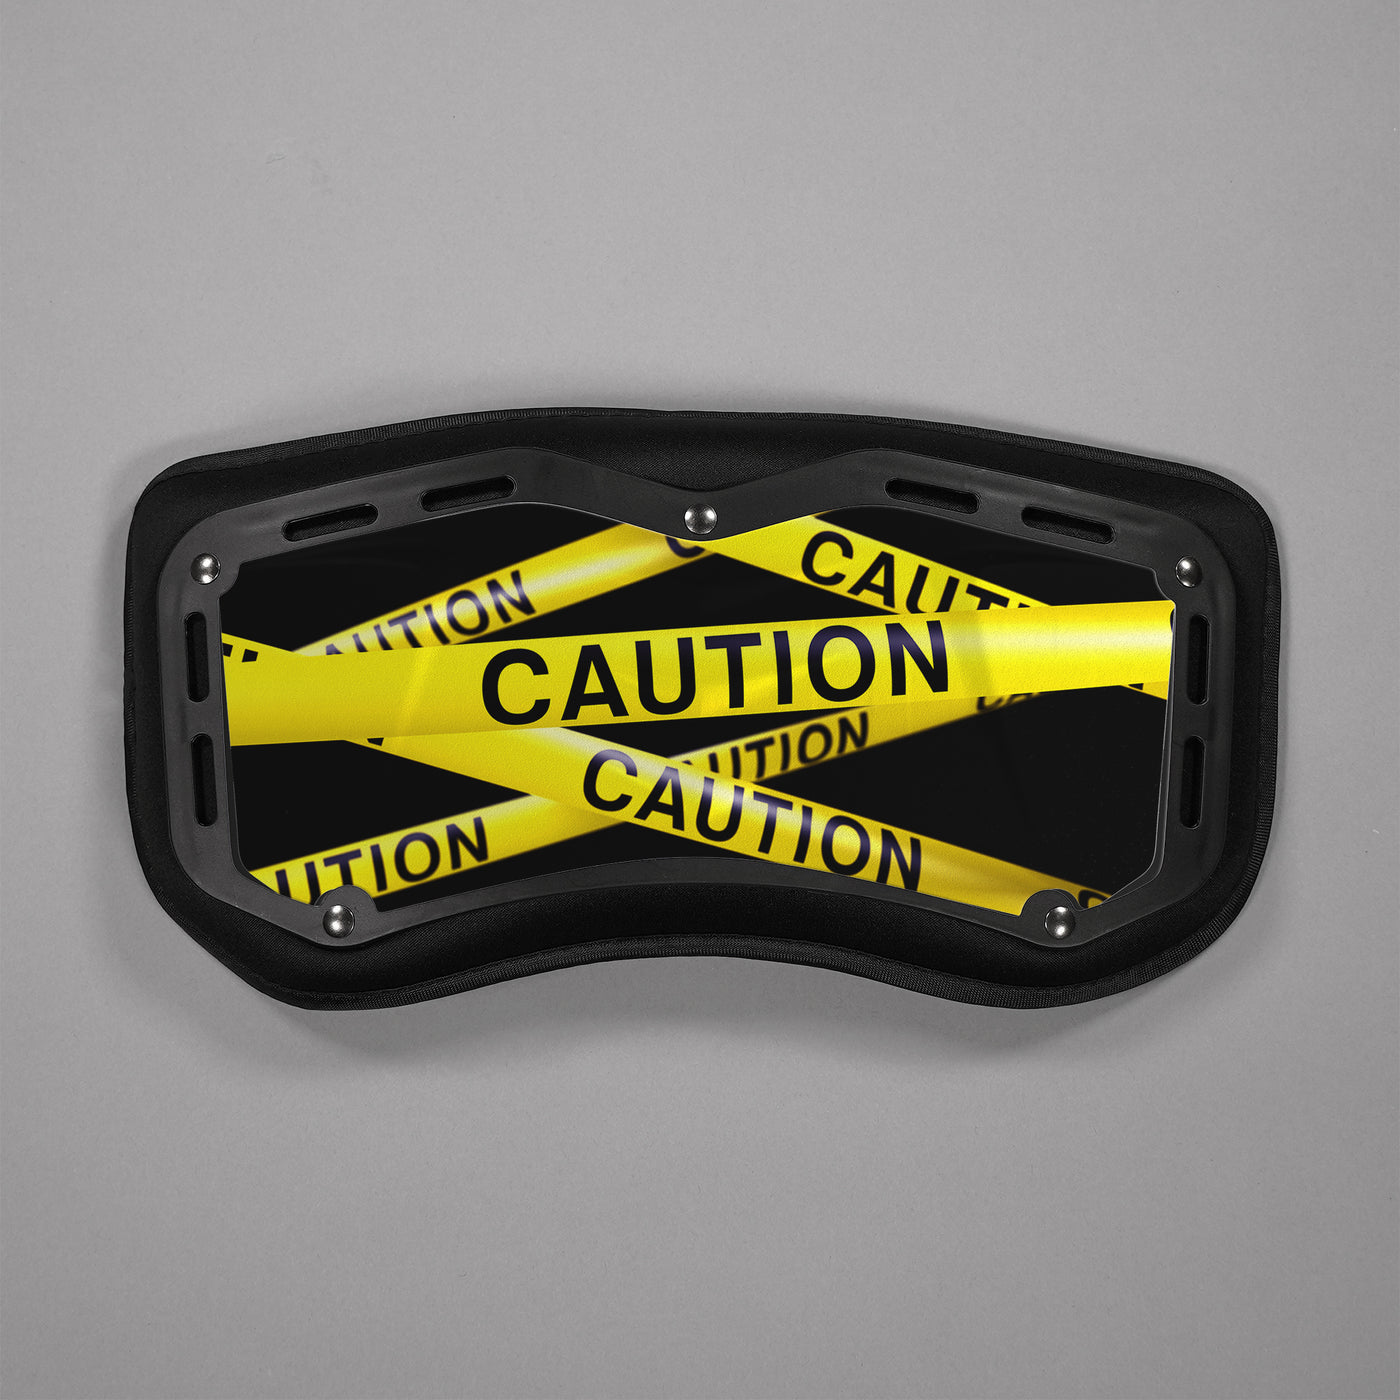 Caution Tape Sticker for Back Plate